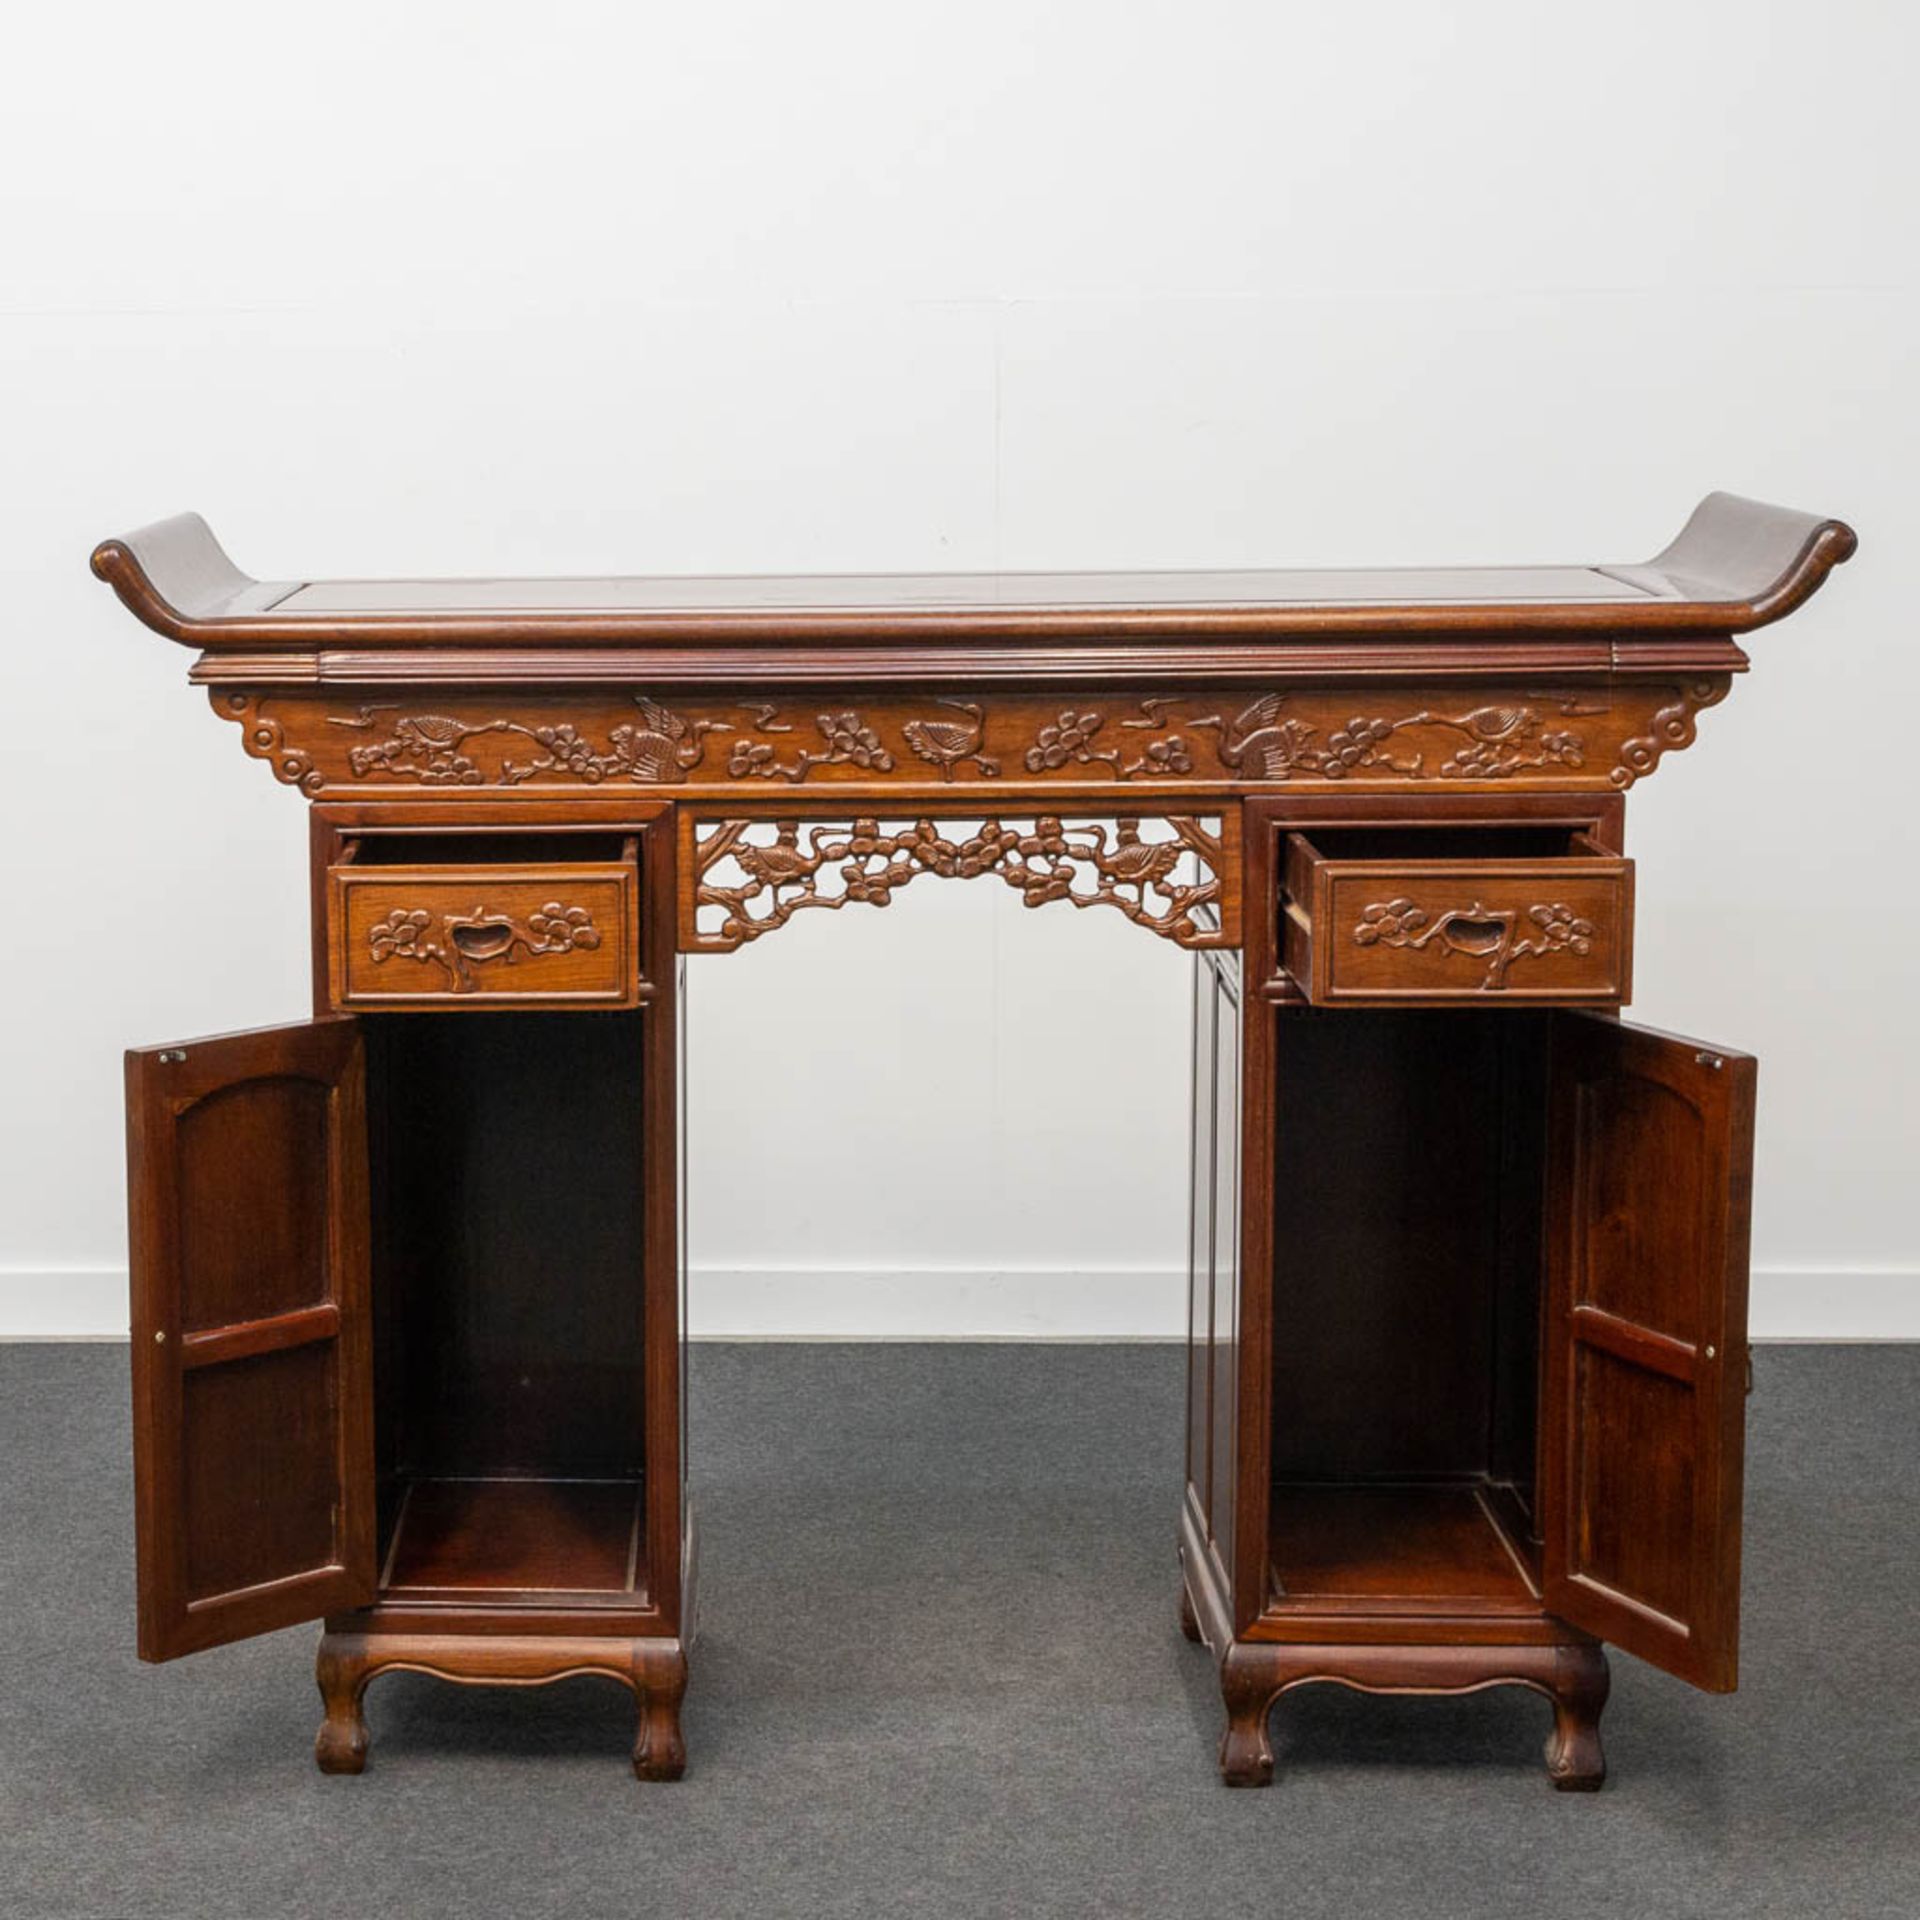 A Chinese hardwood Scroll Desk - Image 8 of 23